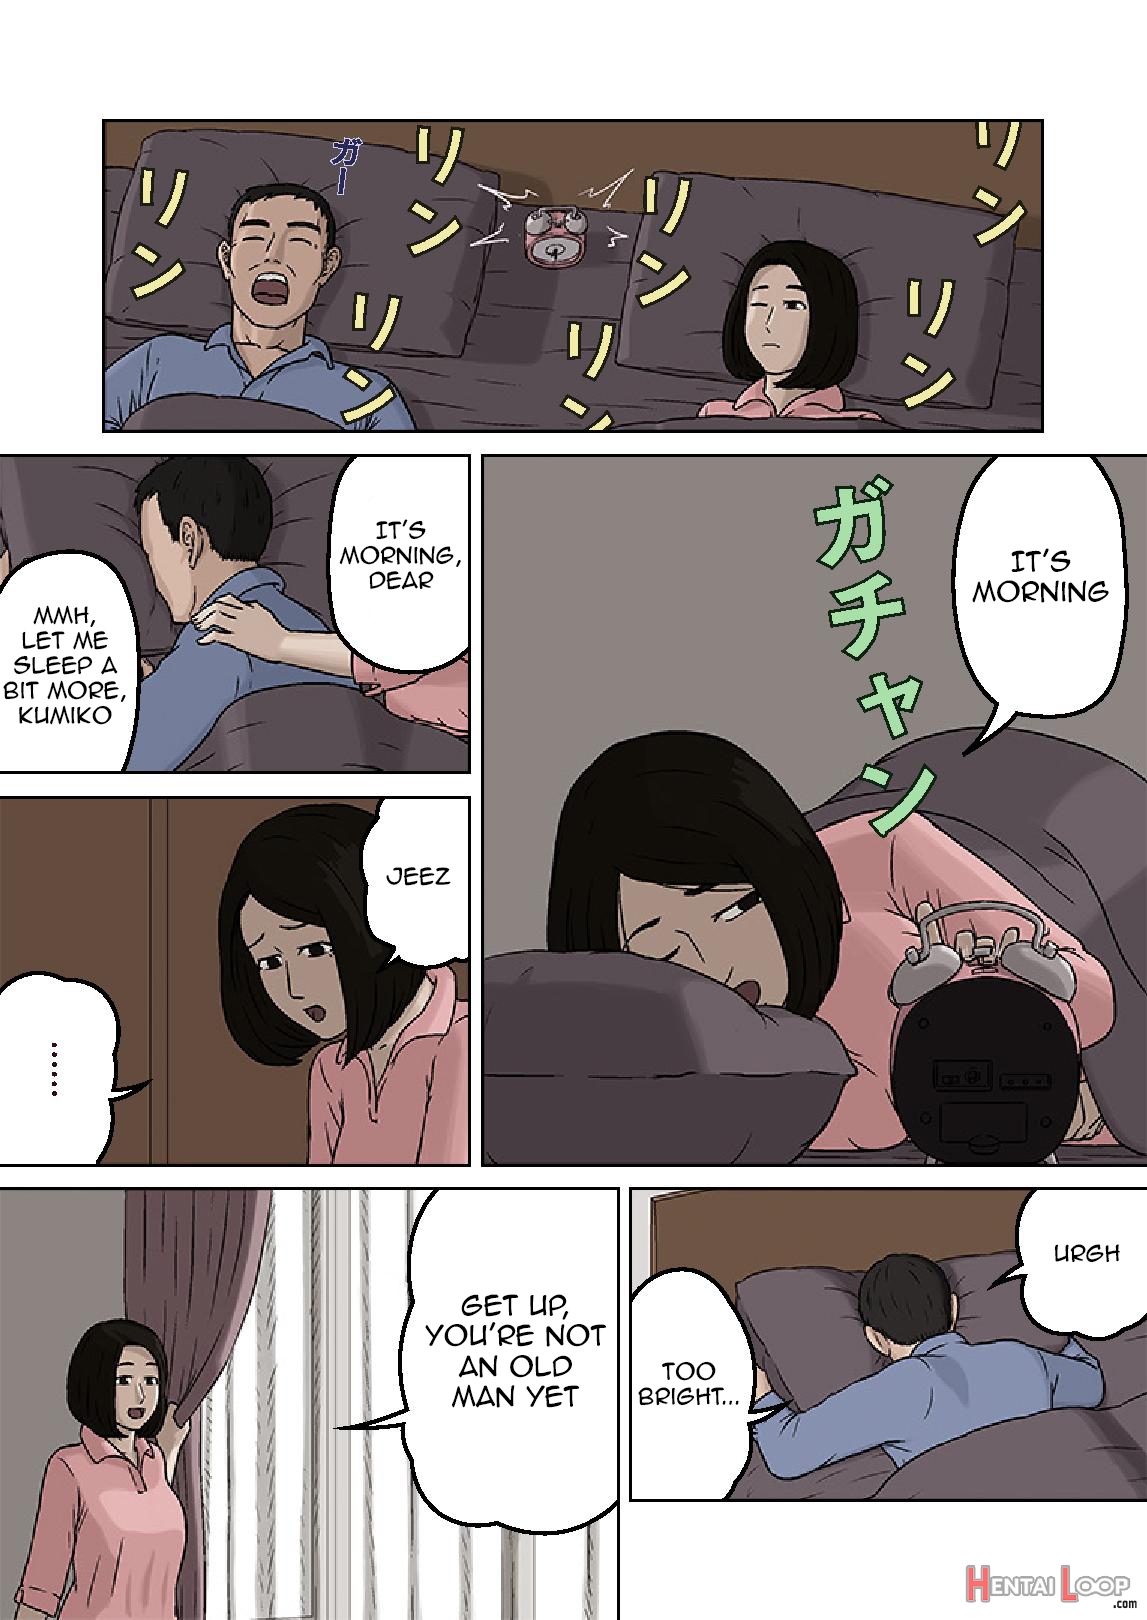 Kumiko And Her Naughty Son page 2